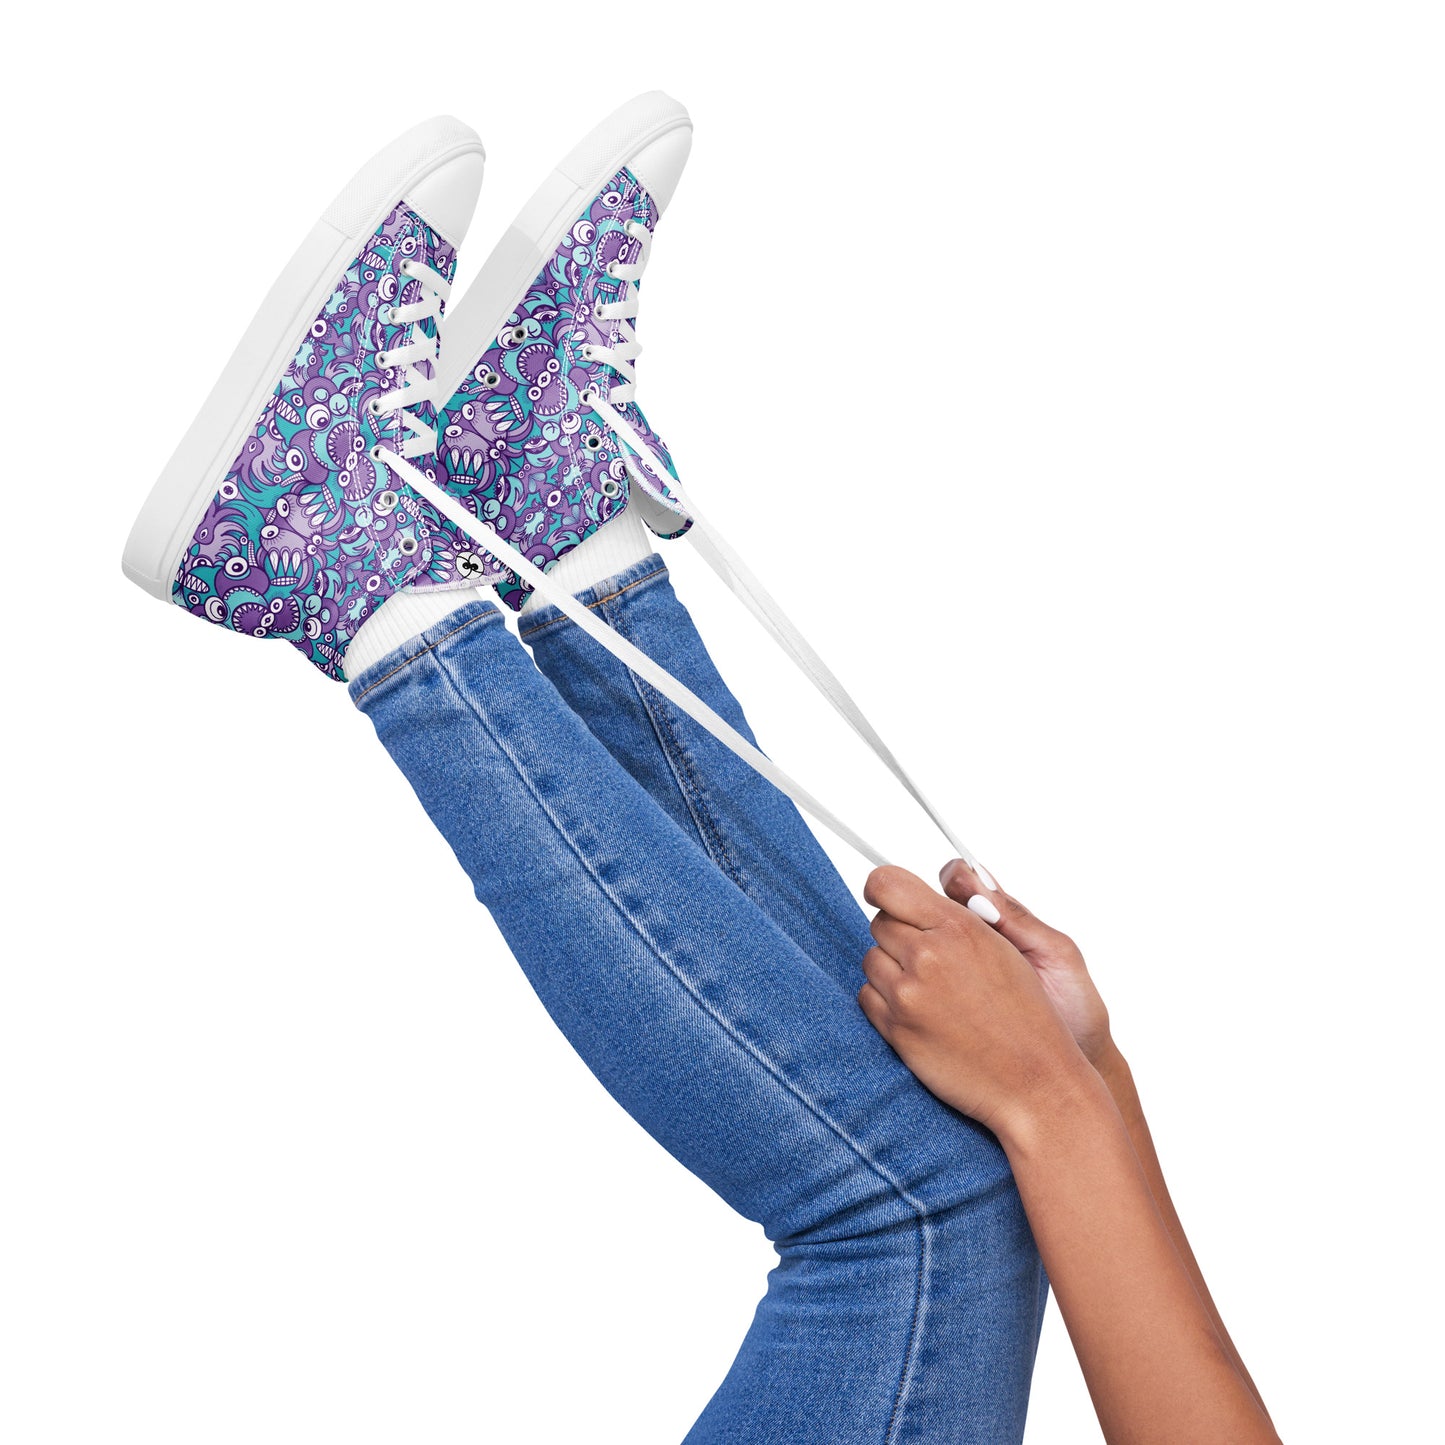 Planet 5: Aquatic Creatures from the Doodles of the Galaxy - Women's High Top Canvas Shoes. Lifestyle